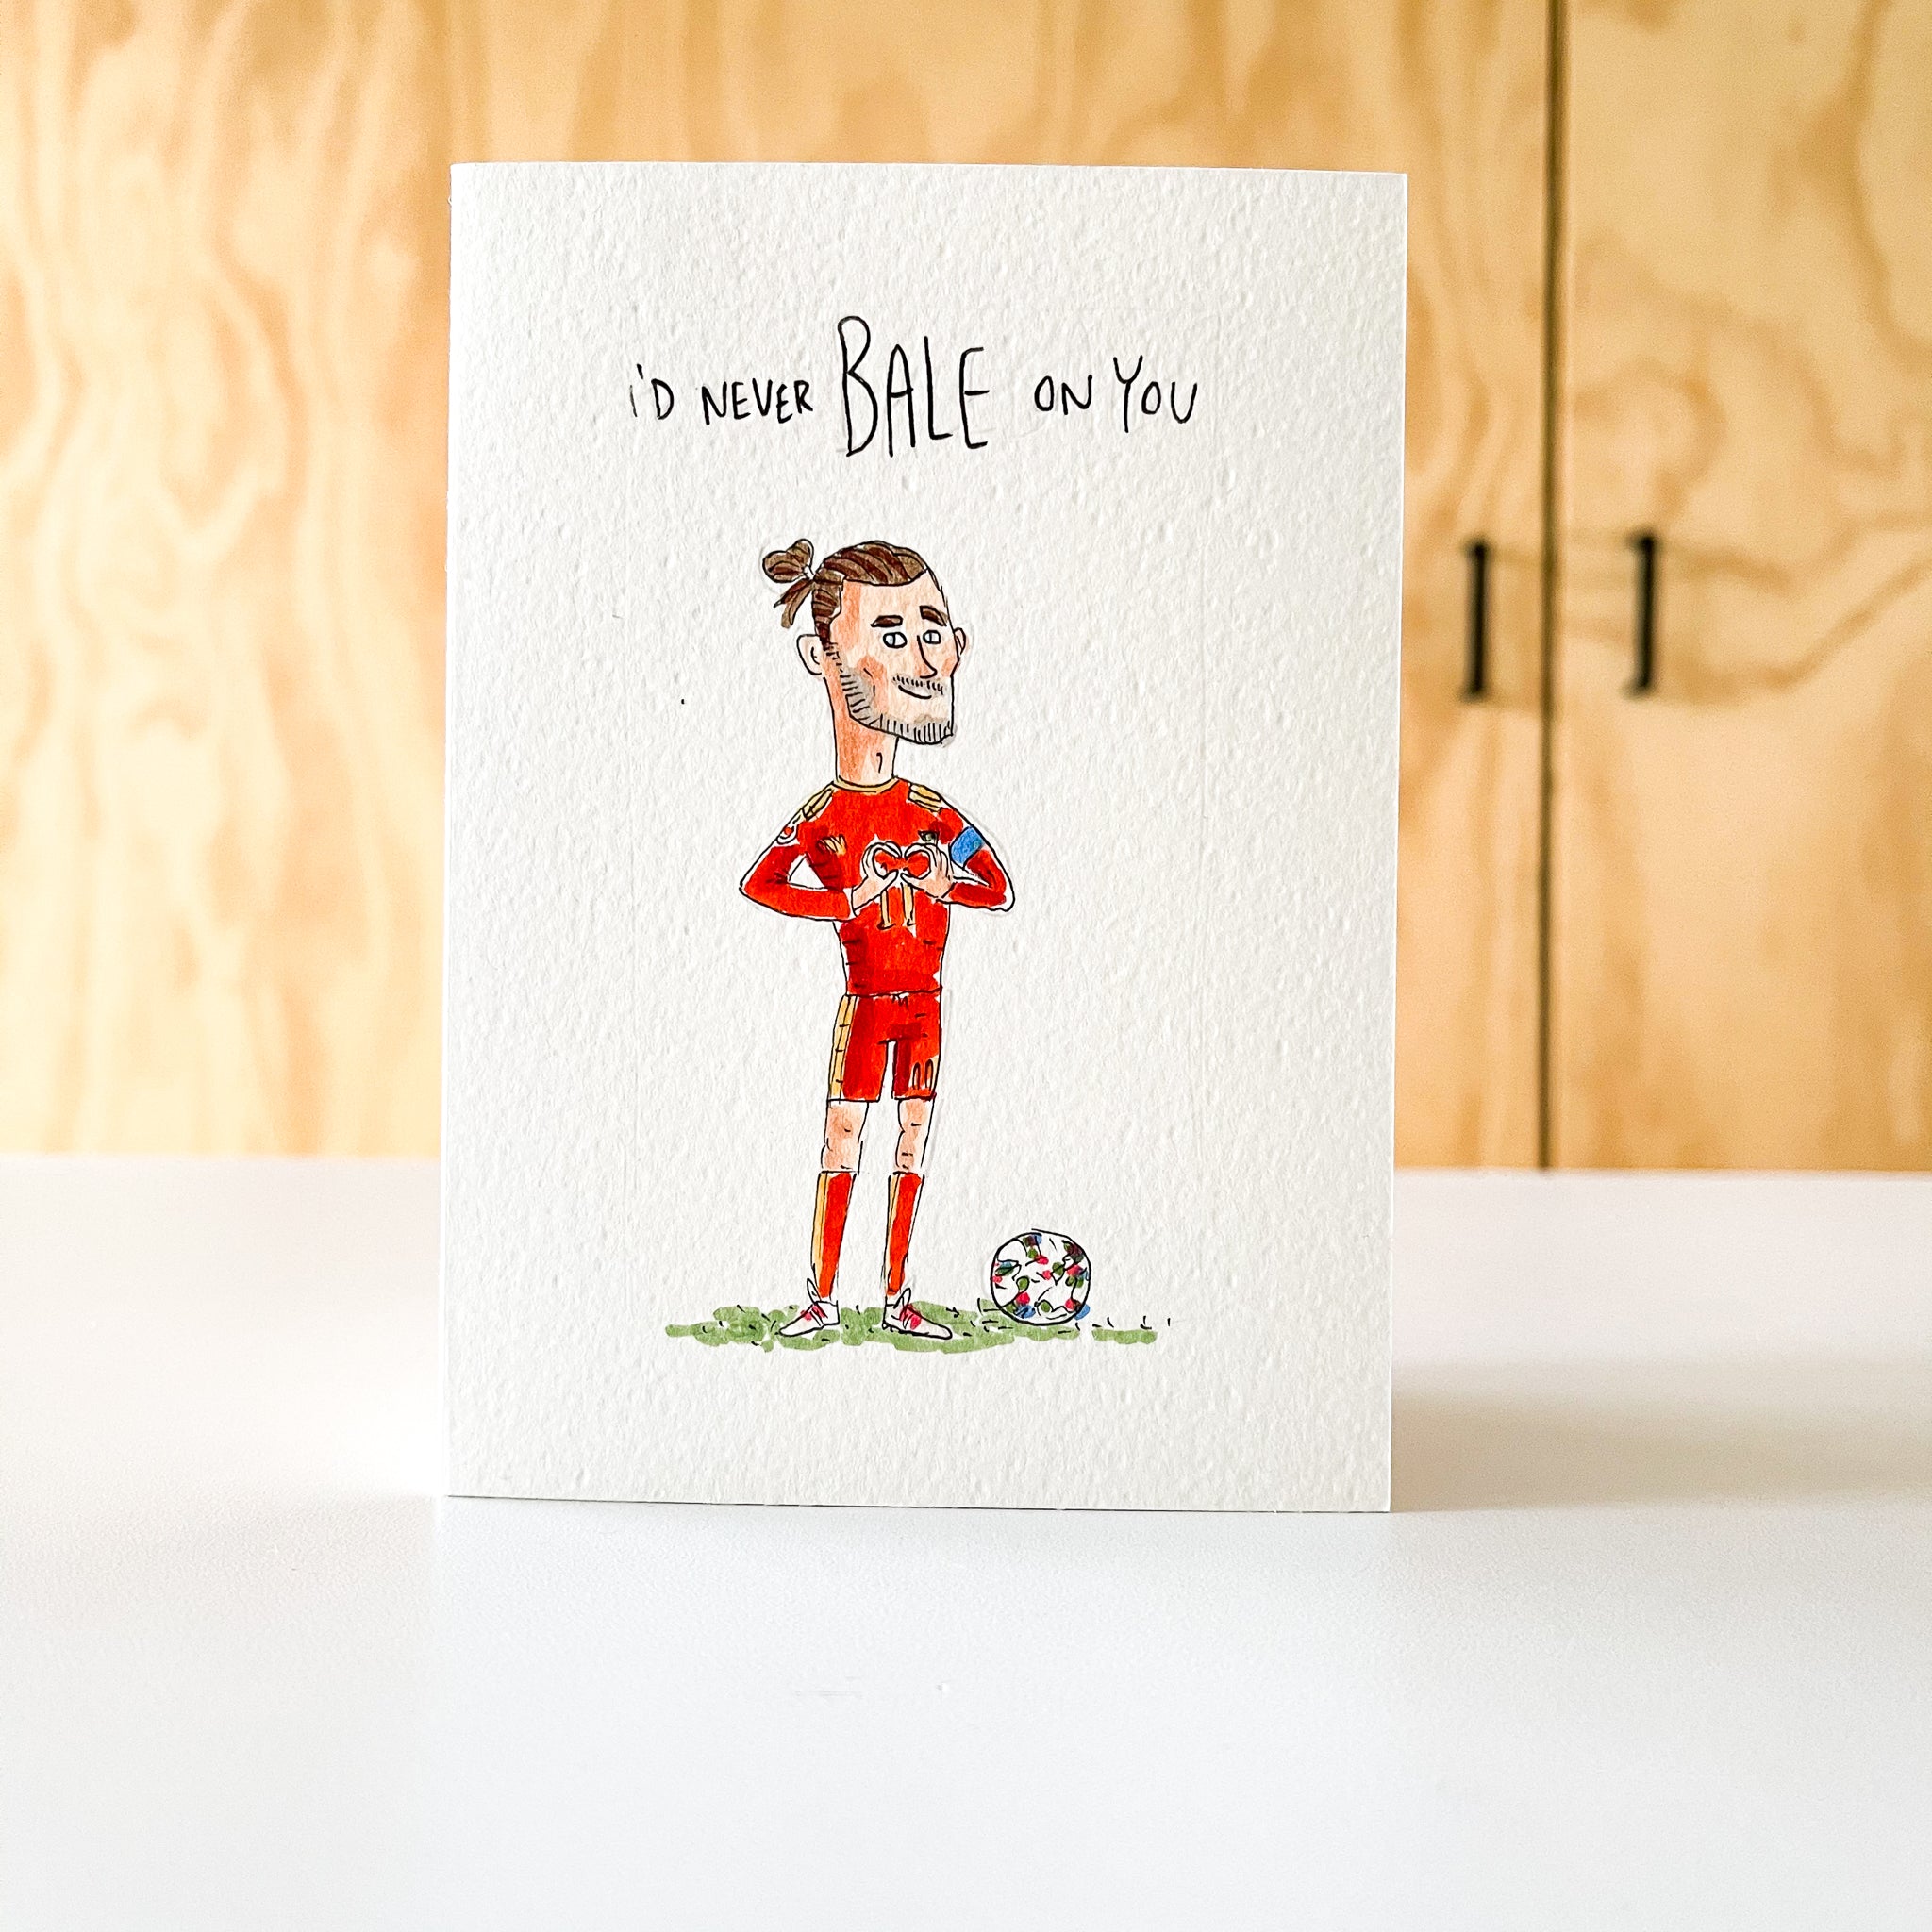 I'd Never Bale on You - Well Drawn